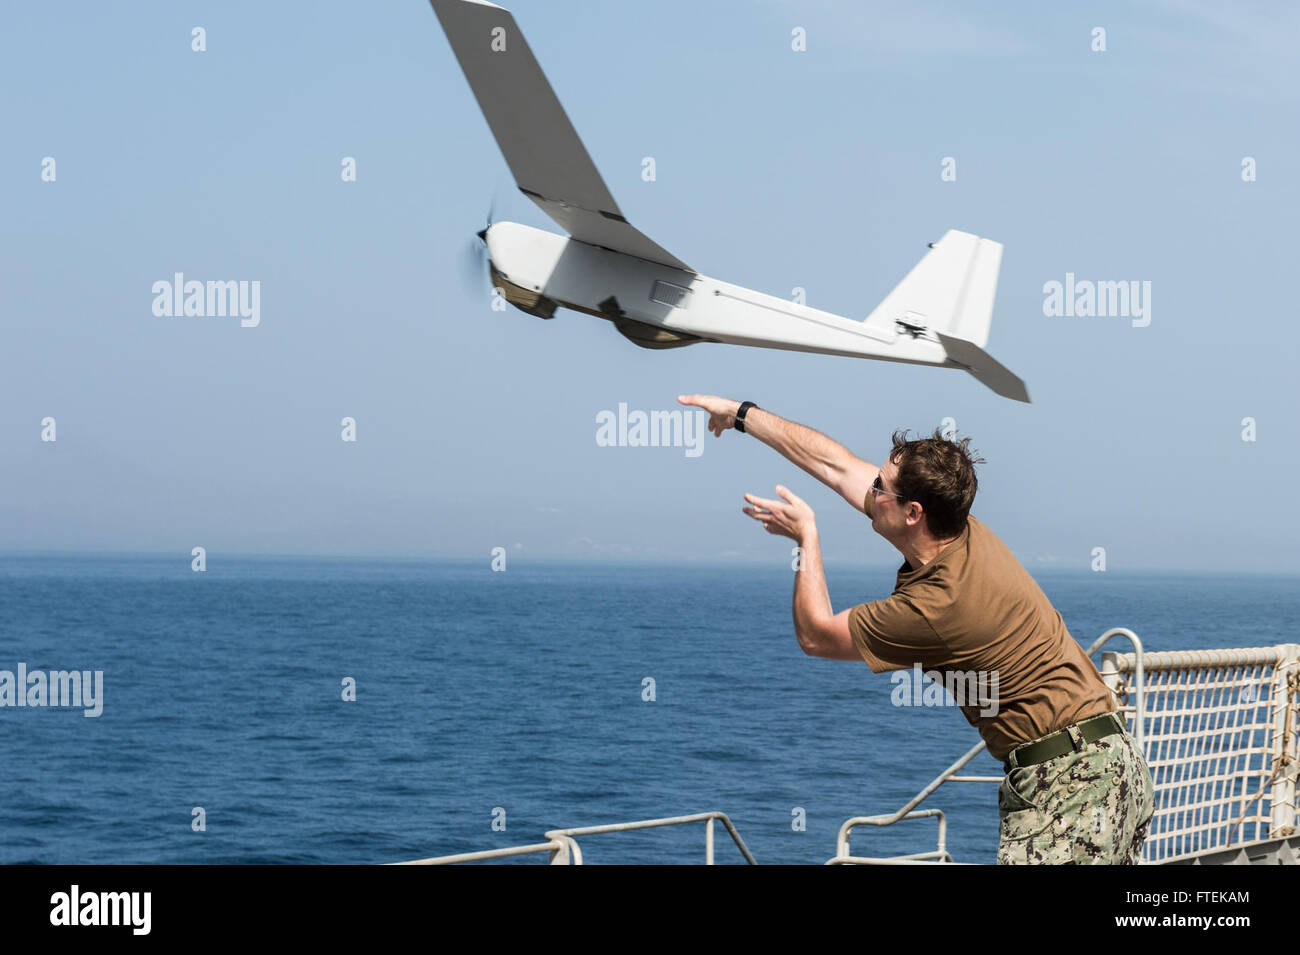 150116-N-JP249-058 ATLANTIC OCEAN (Jan. 16, 2015) Intelligence Specialist 2nd Class Joshua Lesperance, from Spring Valley, Illinois,  launches a Puma Unmanned Aircraft System from the Coastal Riverine Force, while aboard the Military Sealift Command’s joint high-speed vessel USNS Spearhead (JHSV 1) Jan. 16, 2015. Spearhead is on a scheduled deployment to the U.S. 6th Fleet area of operations in support of the international collaborative capacity-building program Africa Partnership Station. (U.S. Navy photo by Mass Communication Specialist 2nd Class Kenan O’Connor/Released) Stock Photo